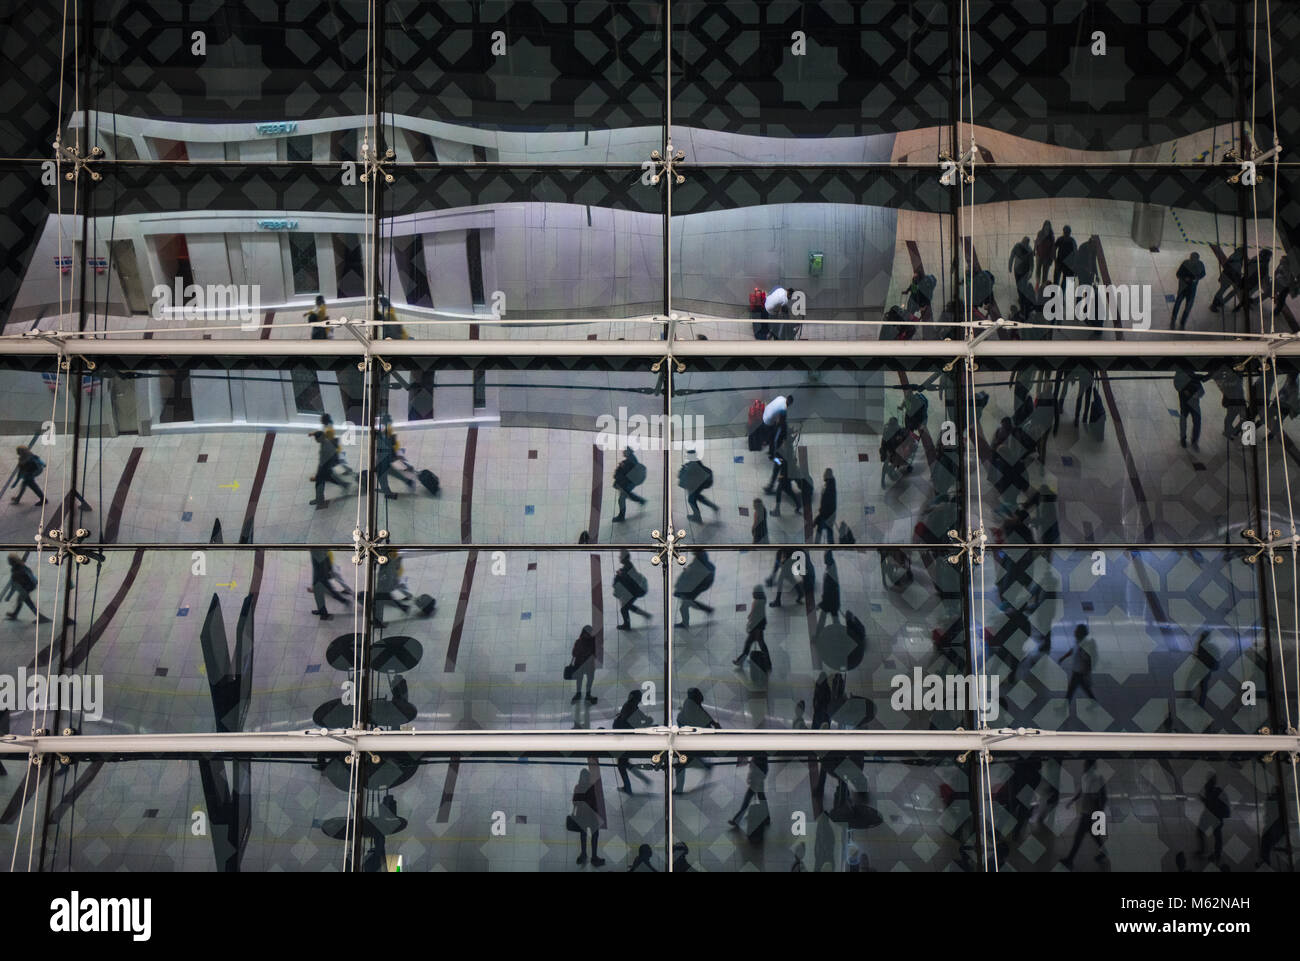 Crowd of passengers reflected in the windows of the Dubai International airport. United Arab Emirates. Stock Photo